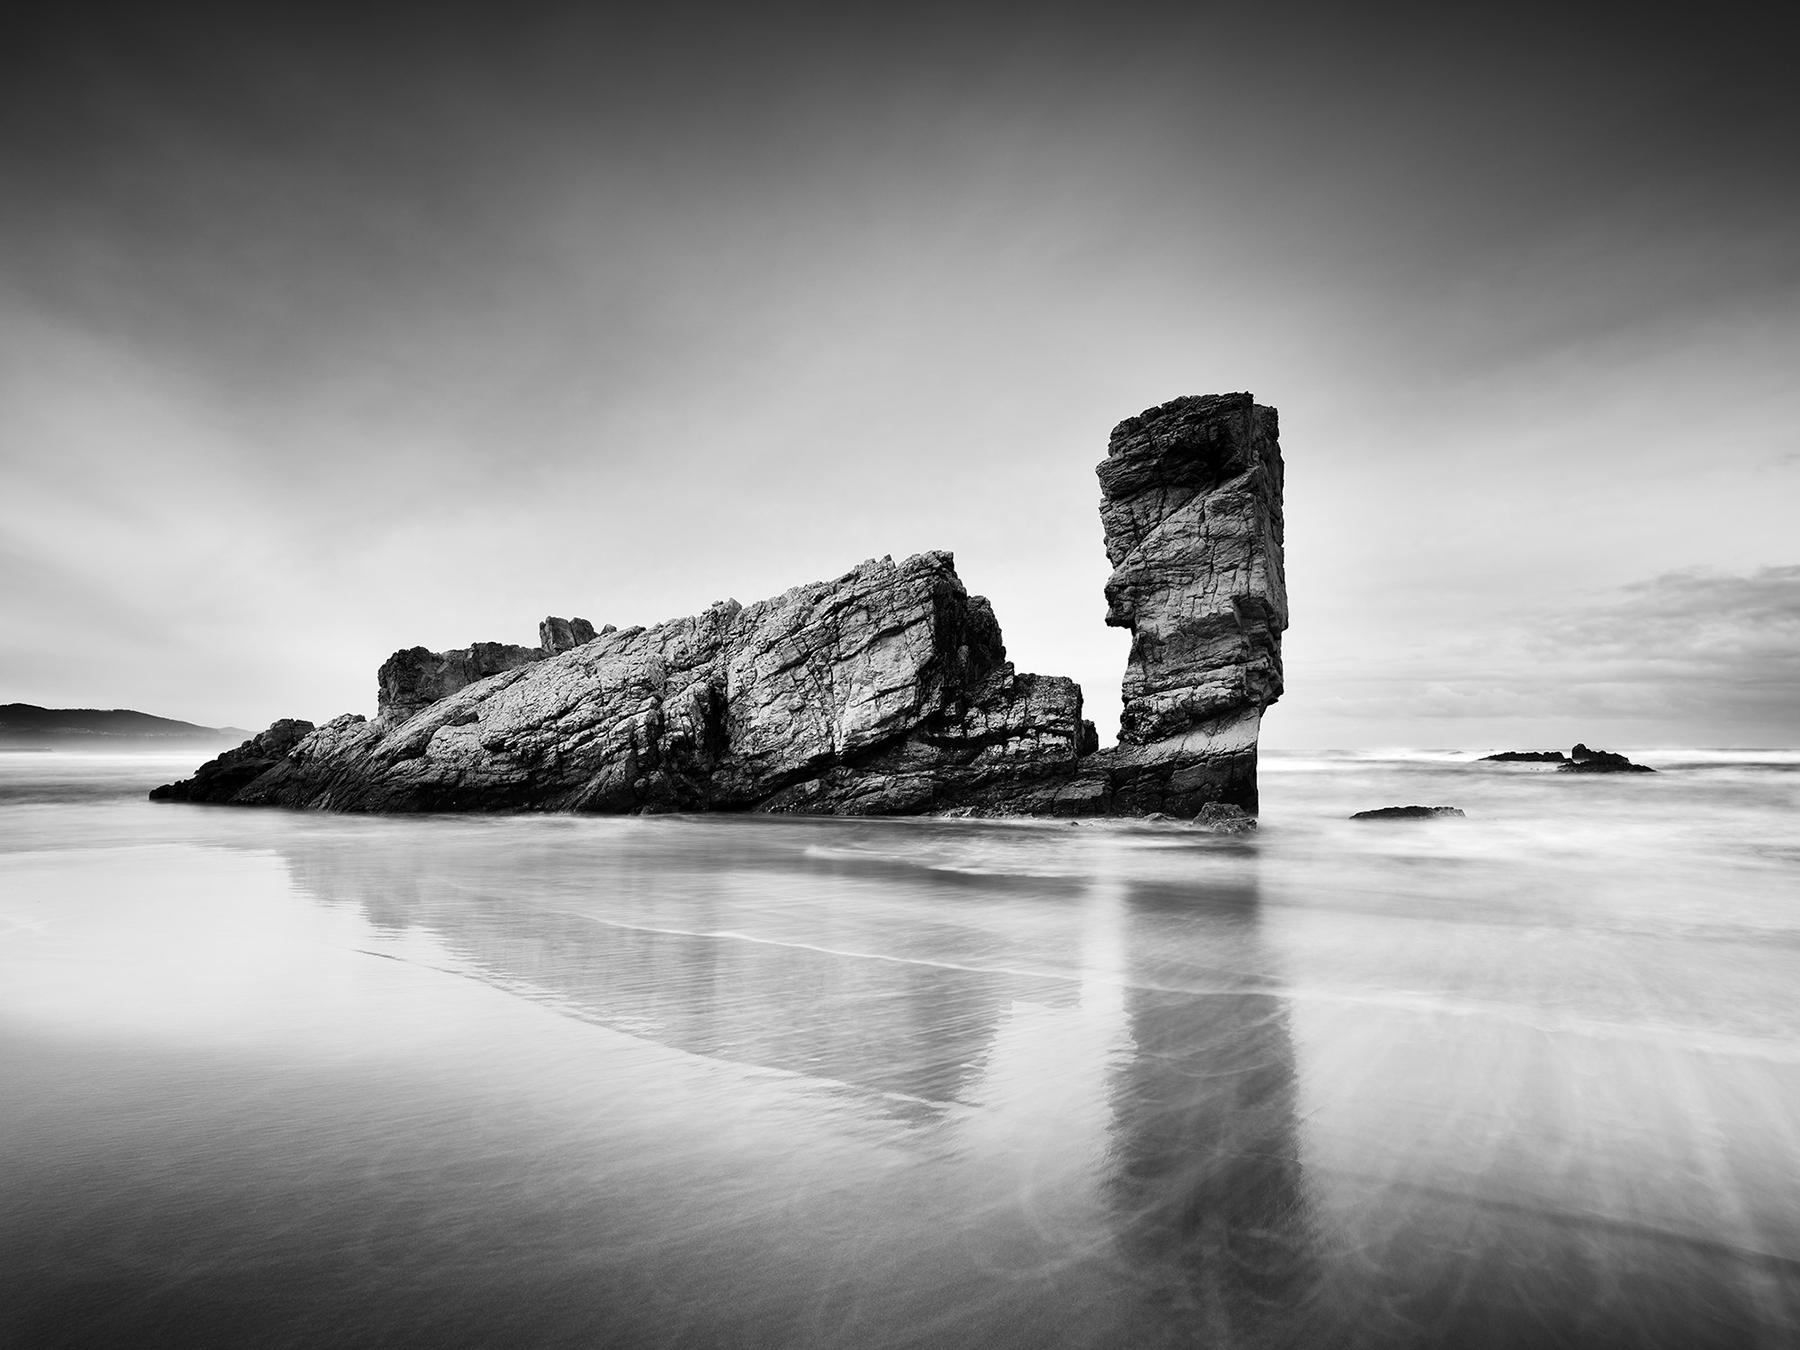 Gerald Berghammer Landscape Photograph - Bay of Biscay, beach, great rock, shoreline, black and white, landscape photo